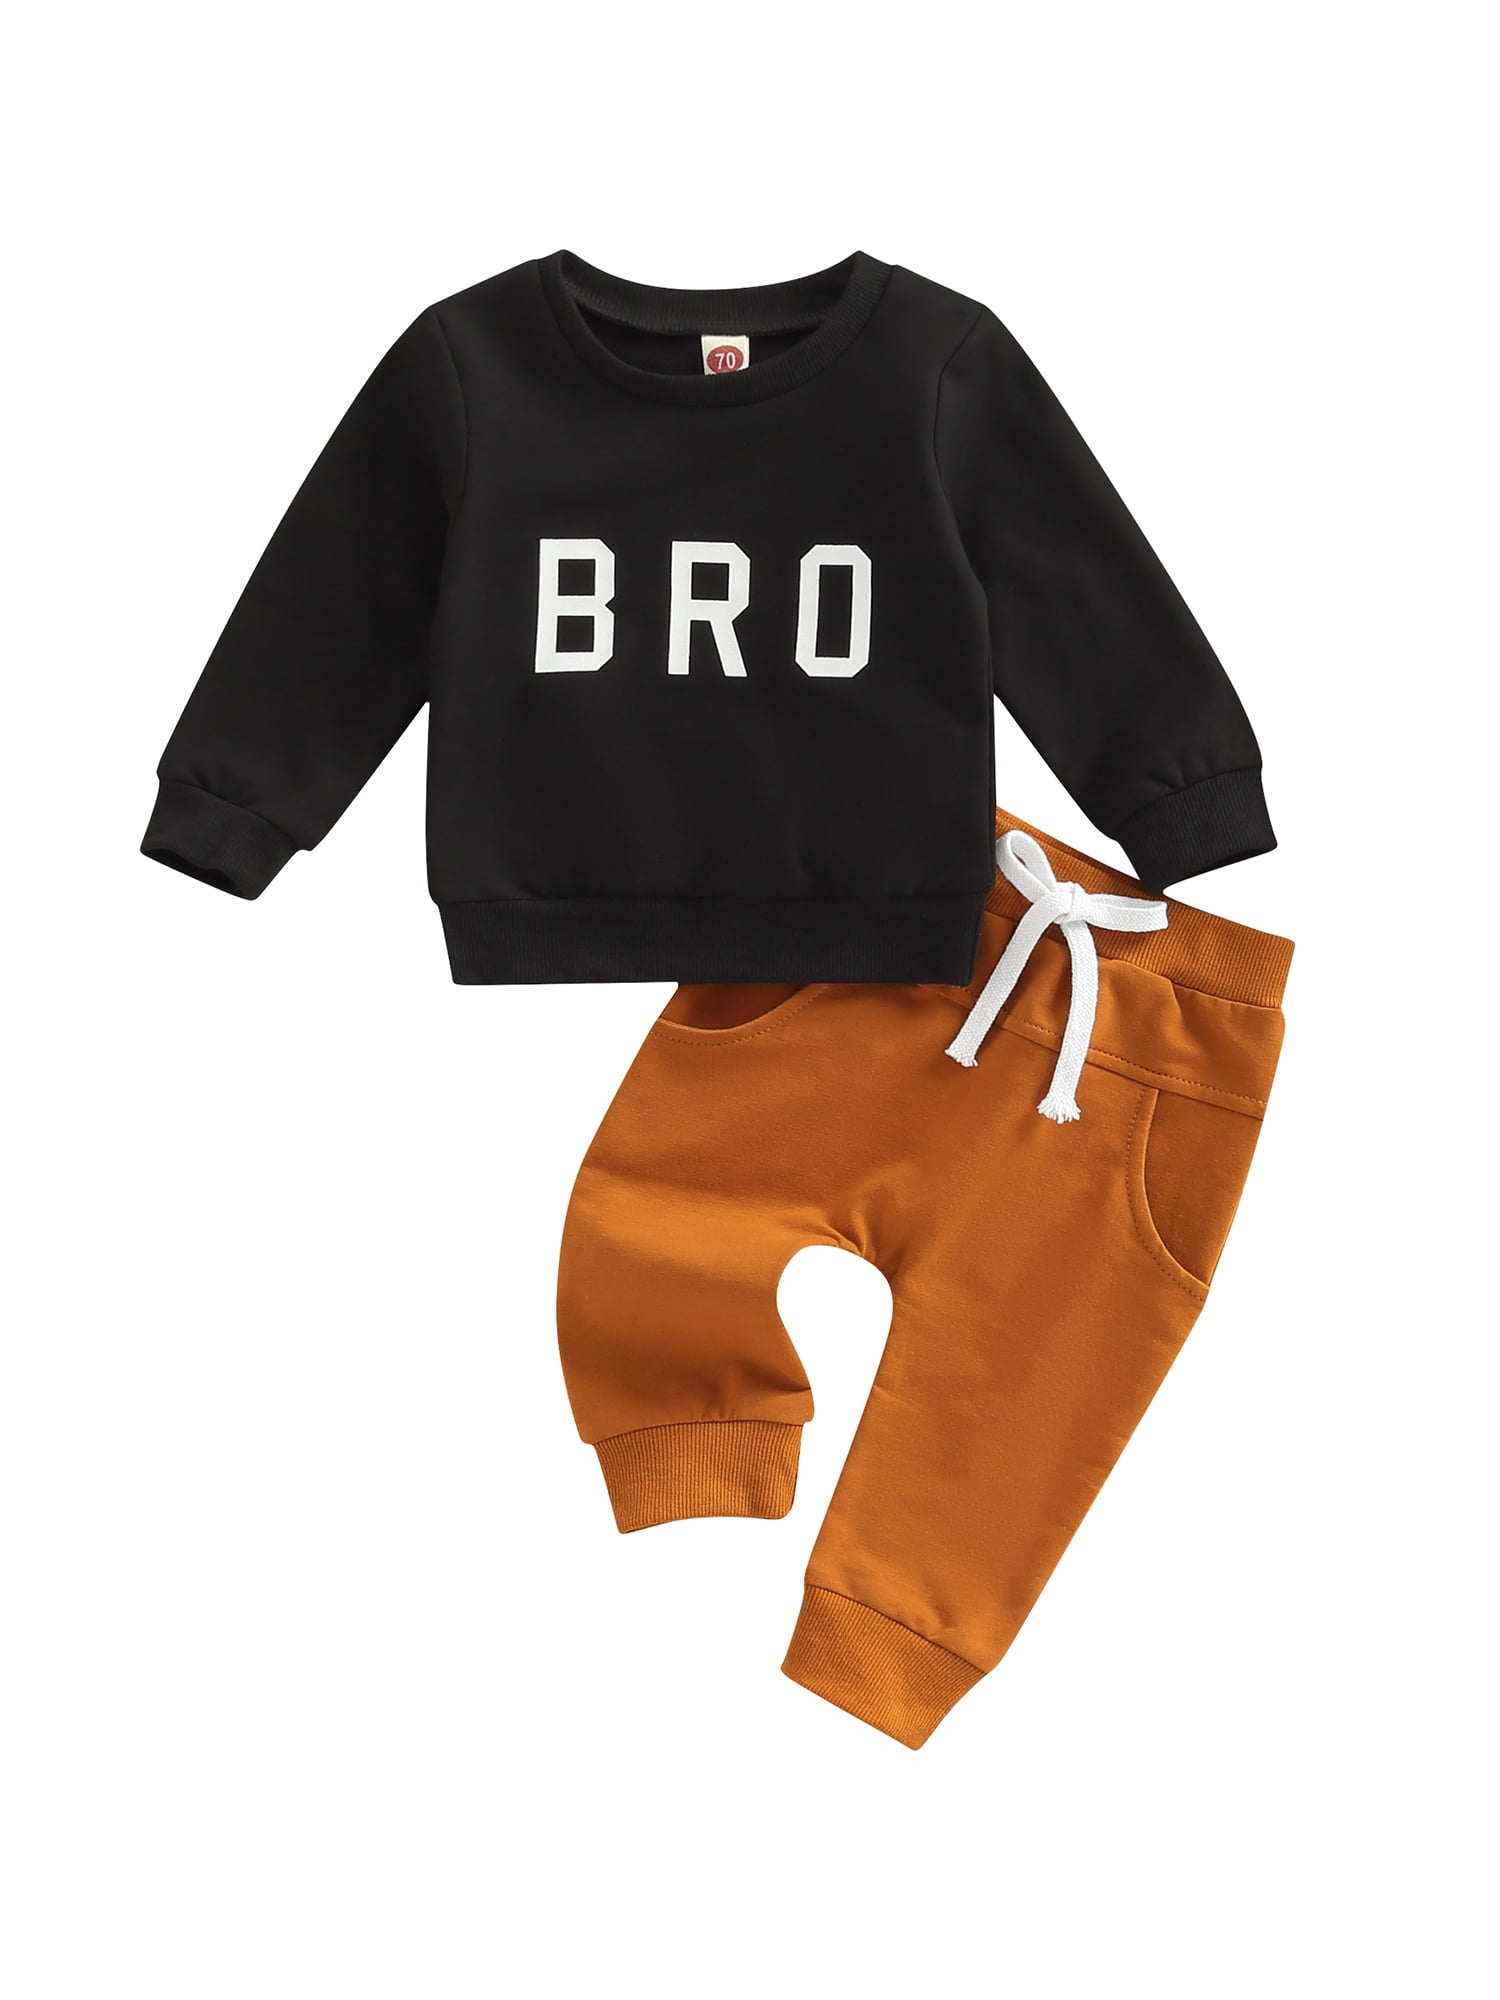 jaweiwi Toddler Baby Boys Fall Outfit Set Letter Print Long Sleeve ...